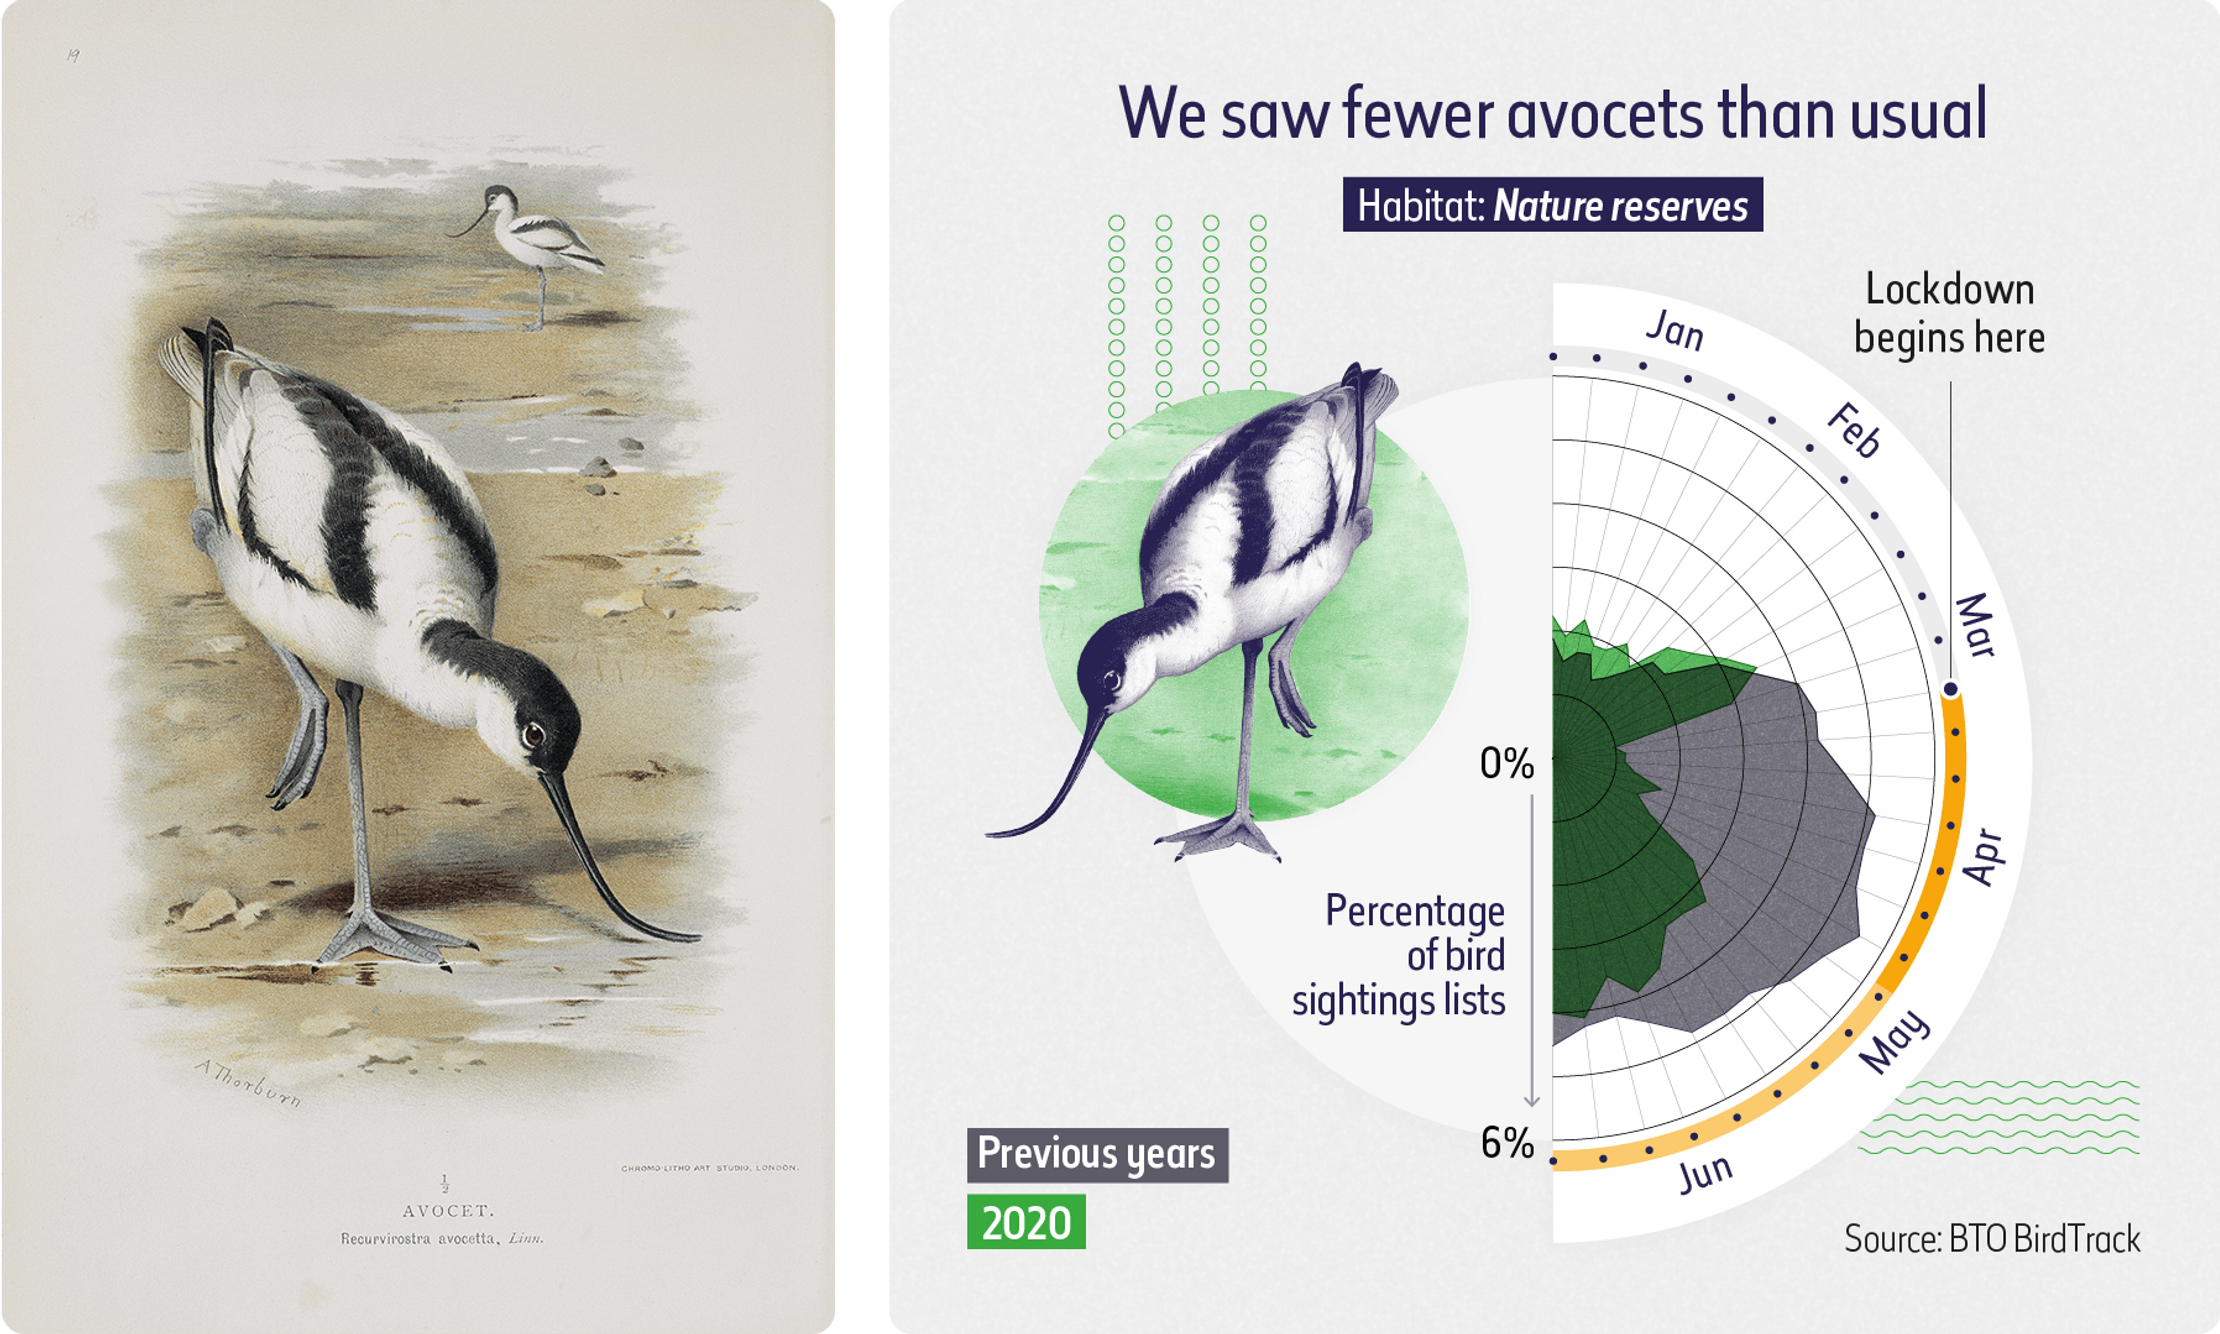 A radar chart showing the percentage of bird sighting lists noting avocets, which are typically seen in Nature reserves' in the first half of 2020. It shows a significant drop in sightings compared to previous years, especially in March and April 2020 when UK lockdowns first began. 